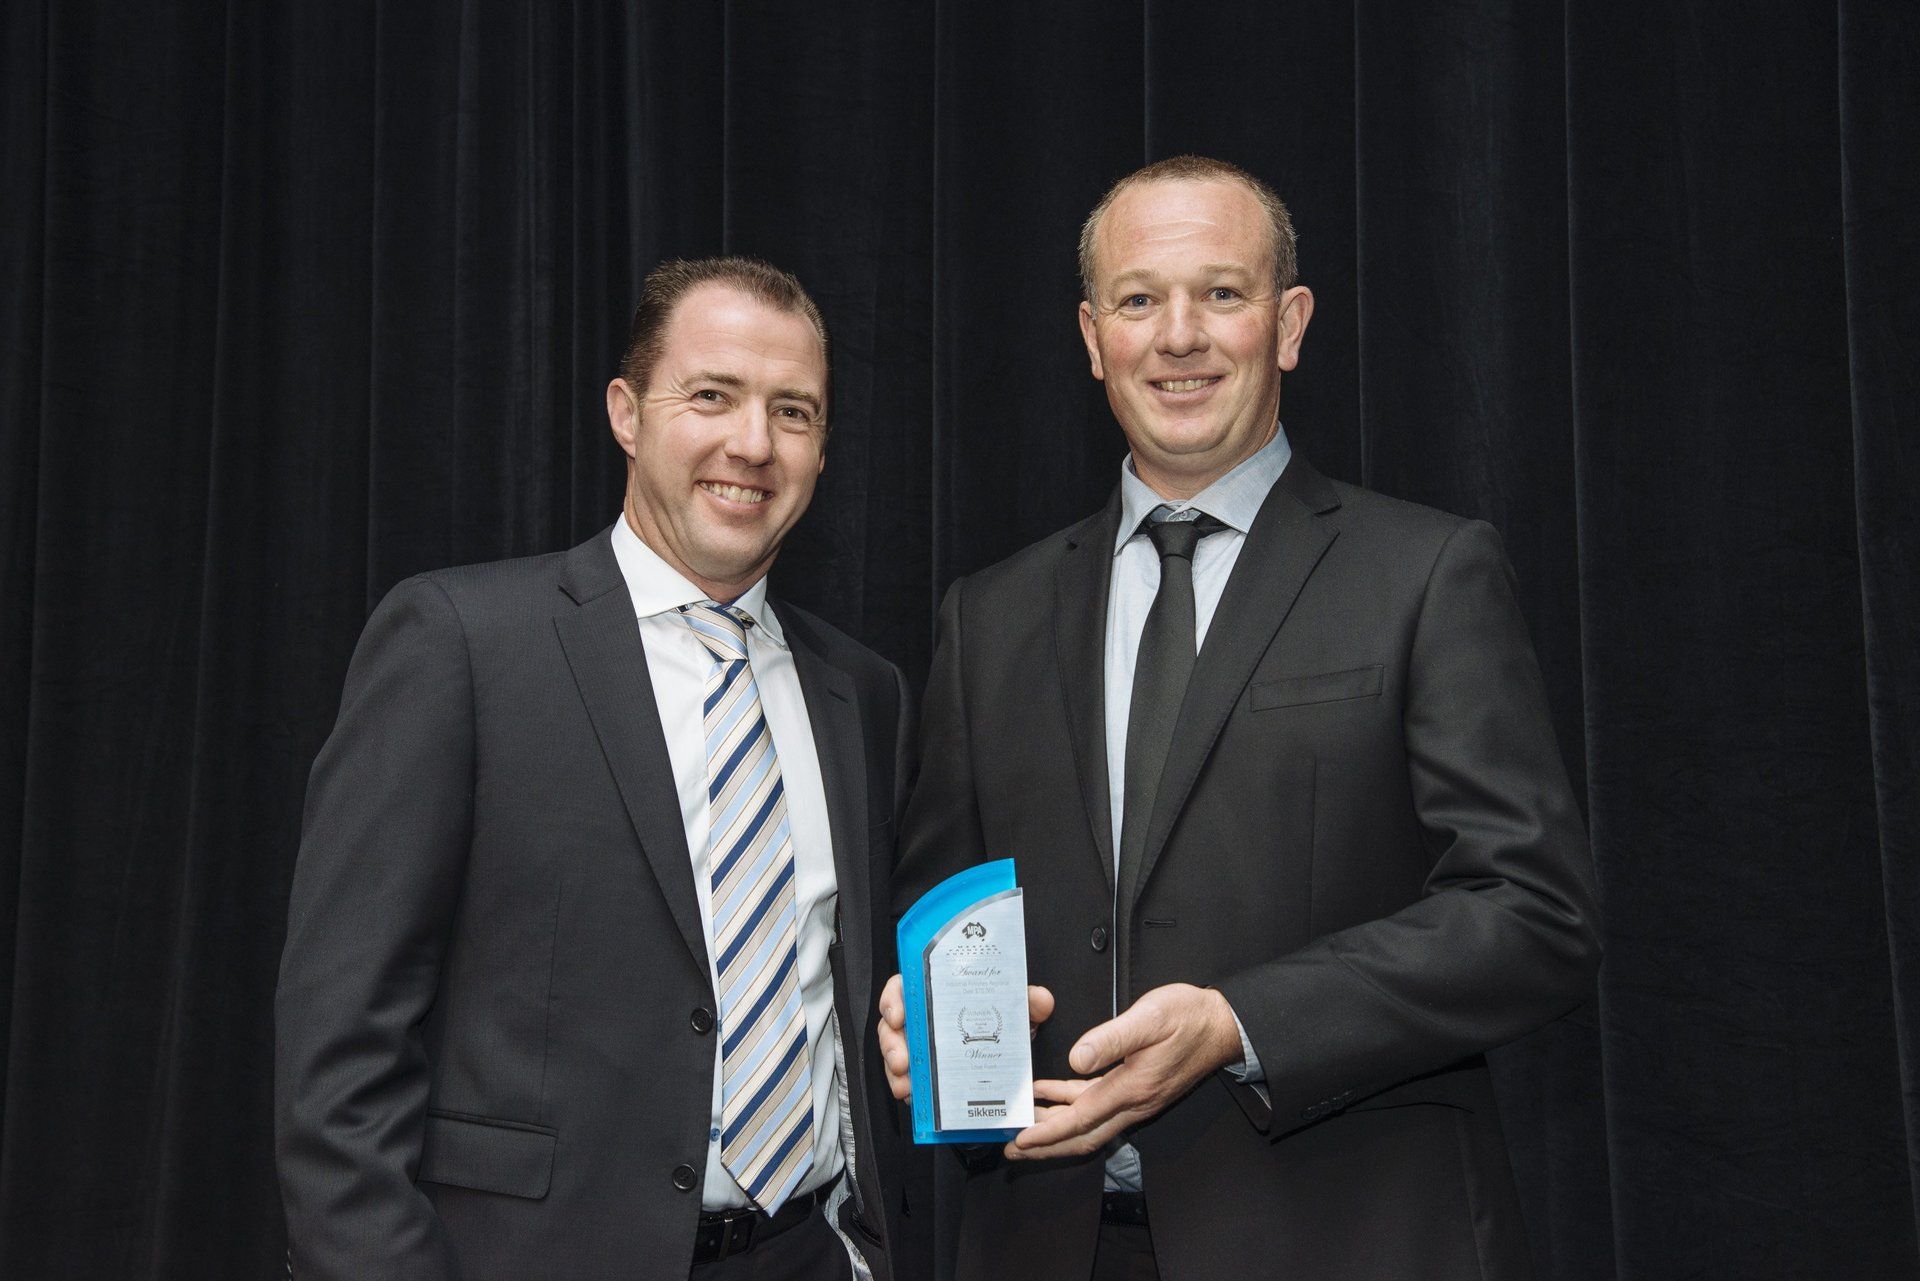 two men in suits and ties are standing next to each other holding an award .